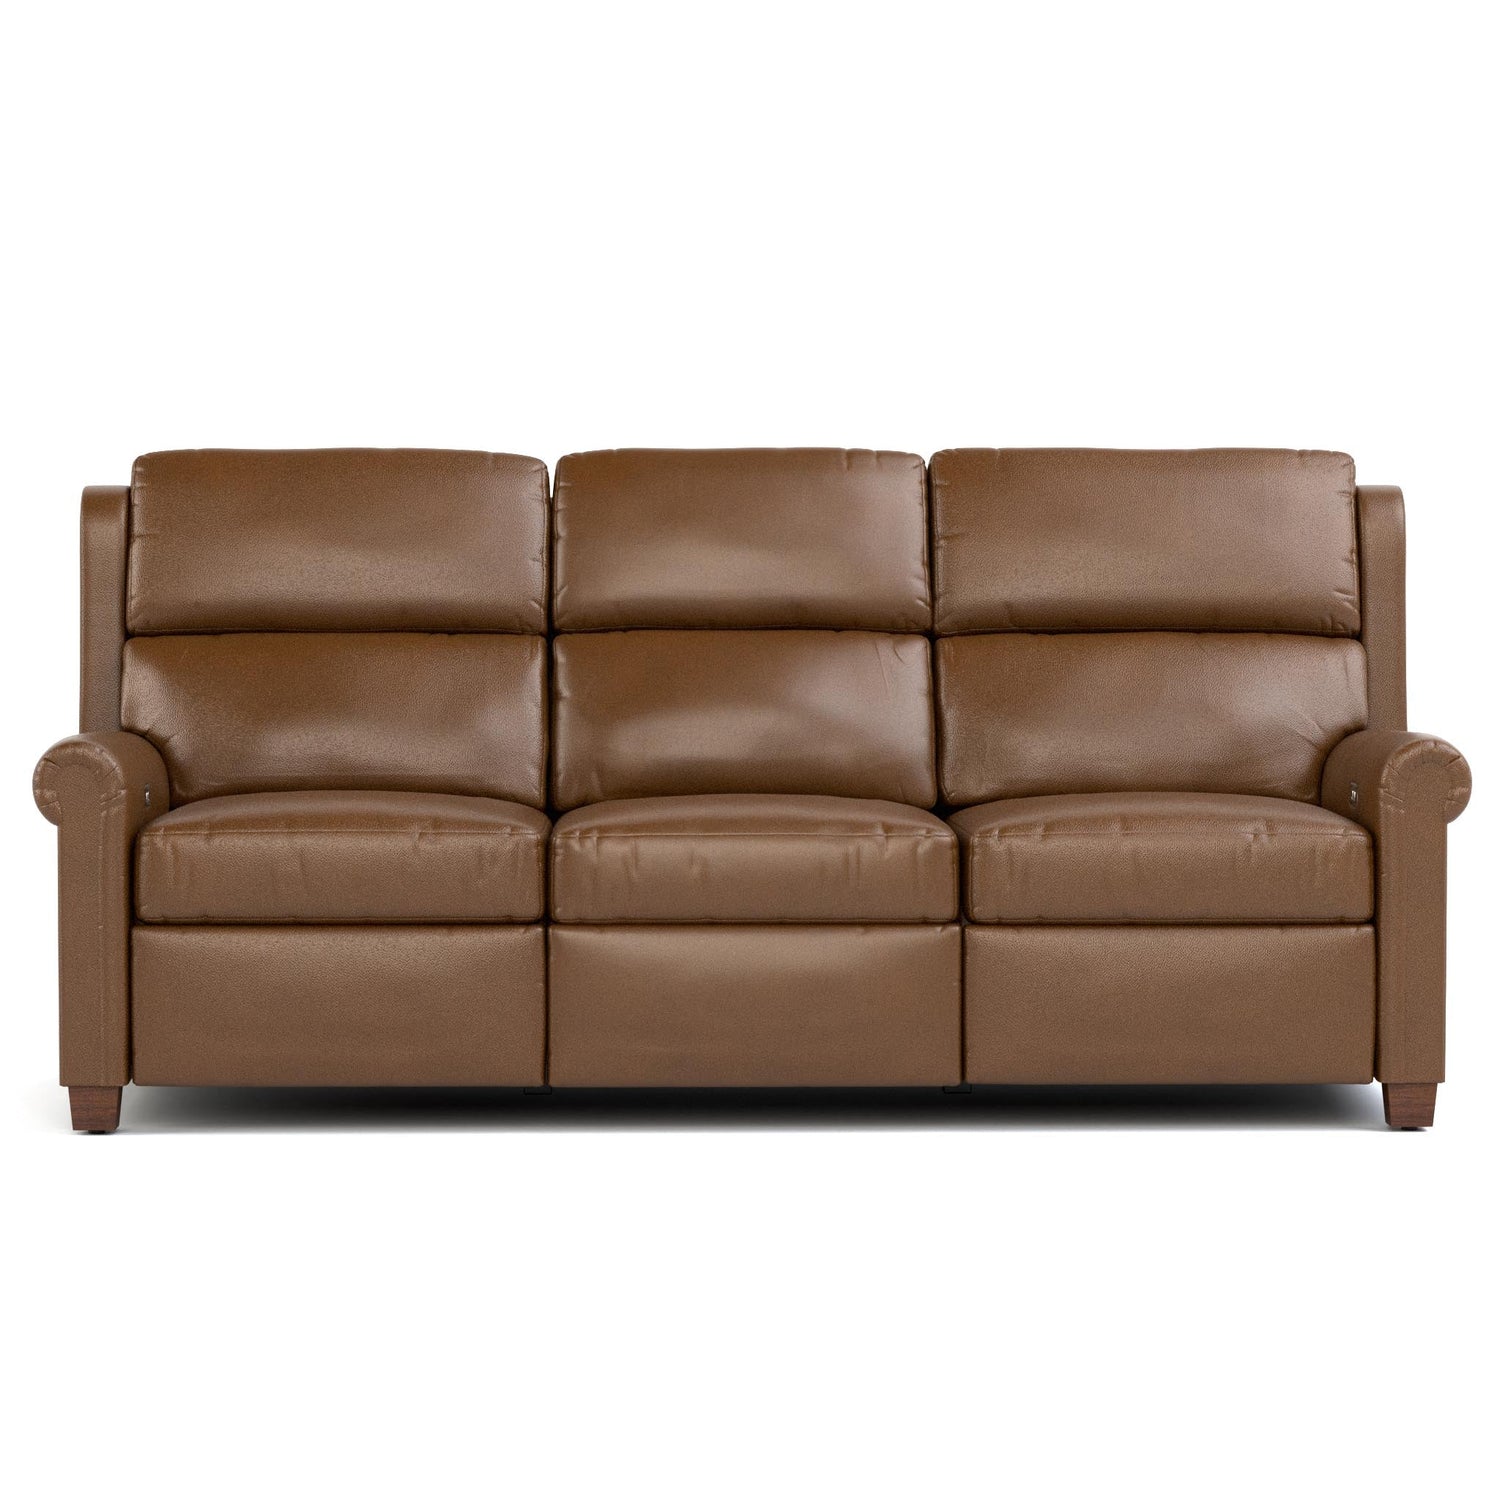 Woodlands Small Roll Arm Motion Sofa Selvano Bark - Front